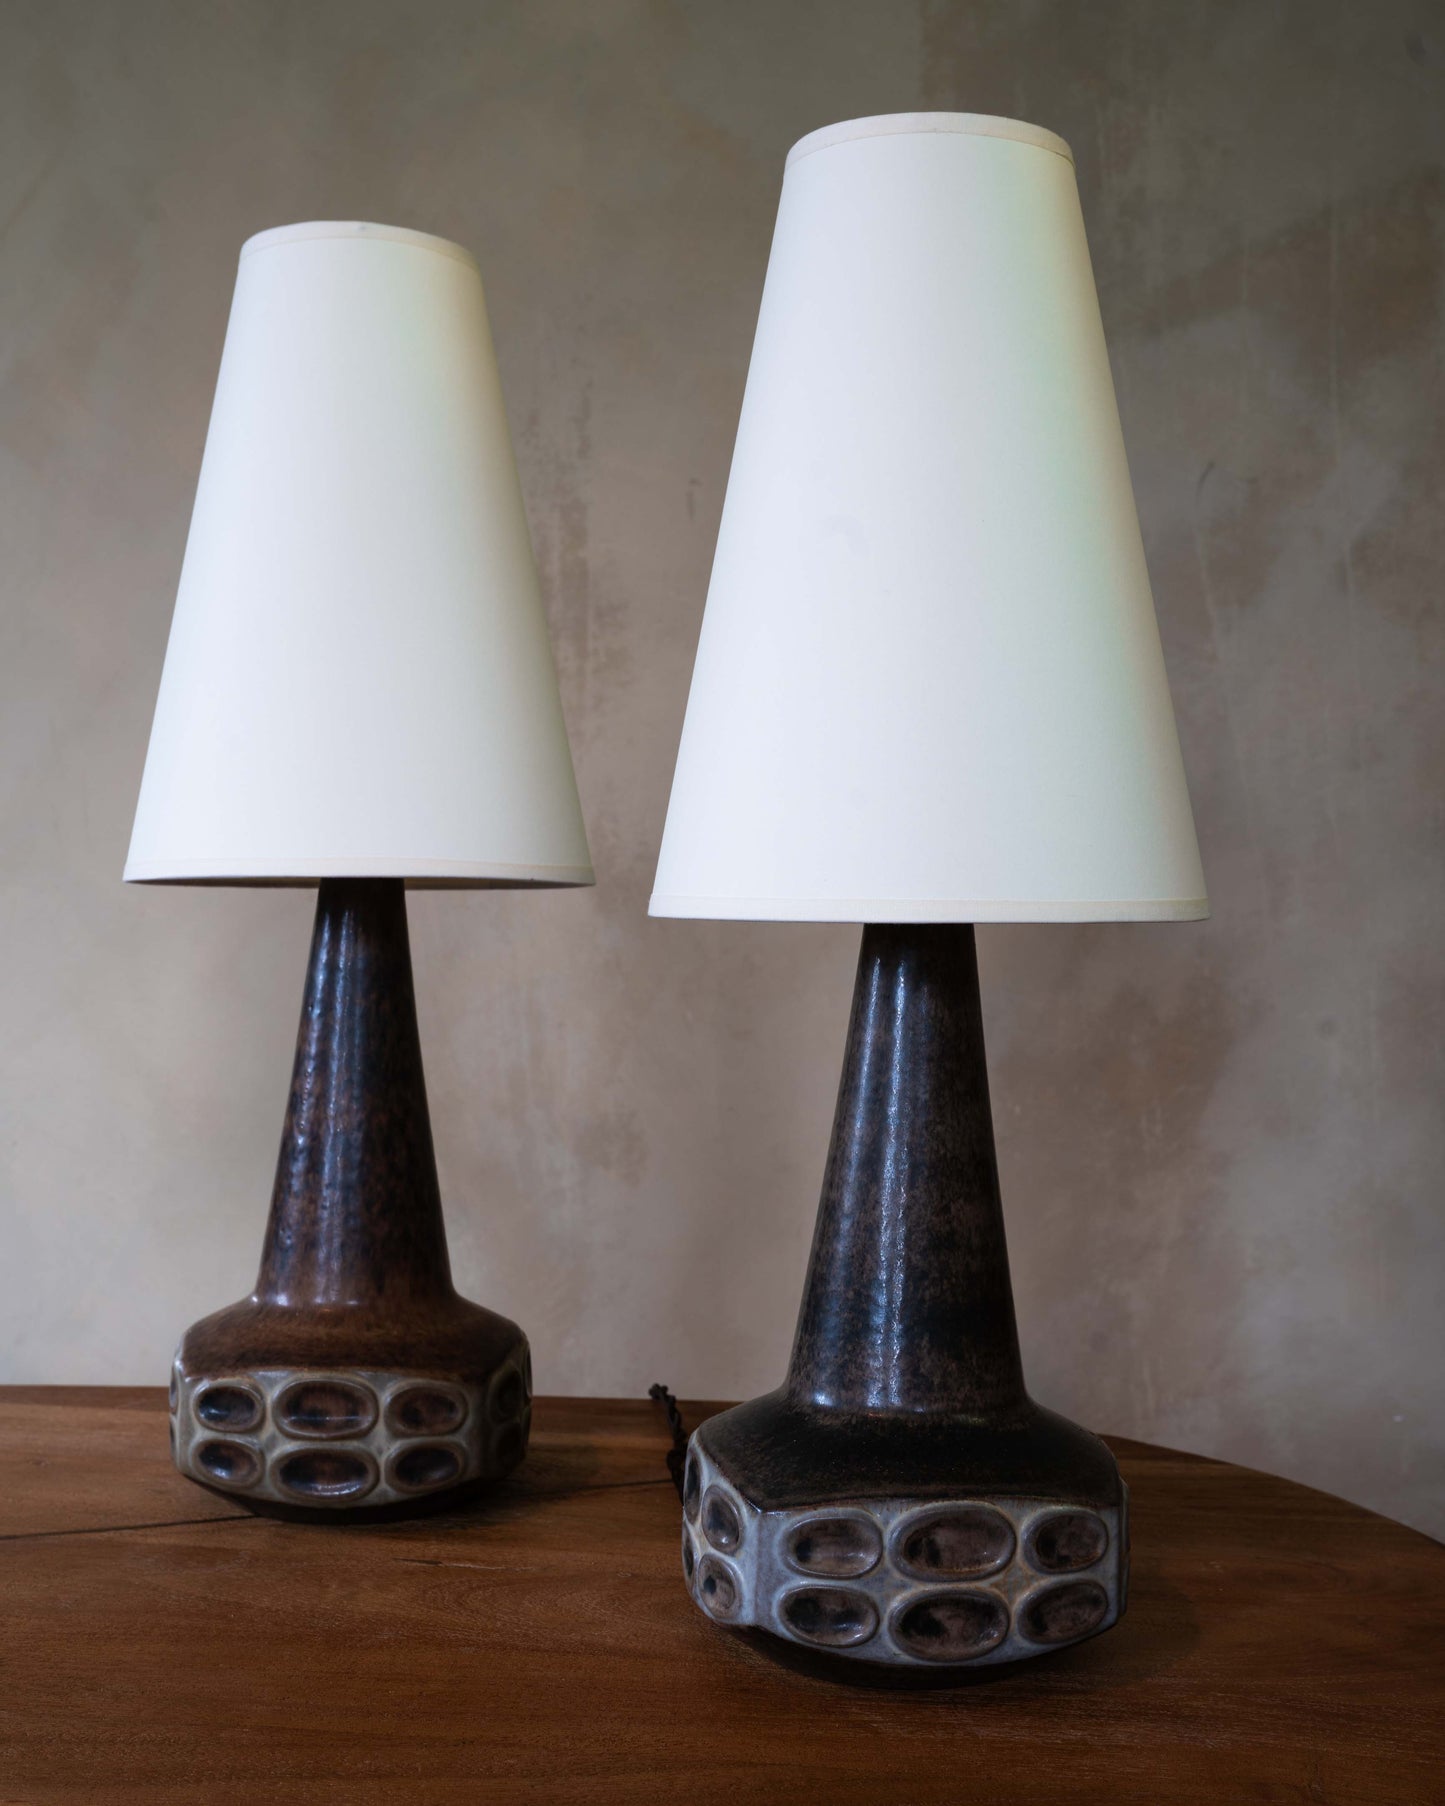 Marianne Starck for Michael Anderson Ceramic Lamps